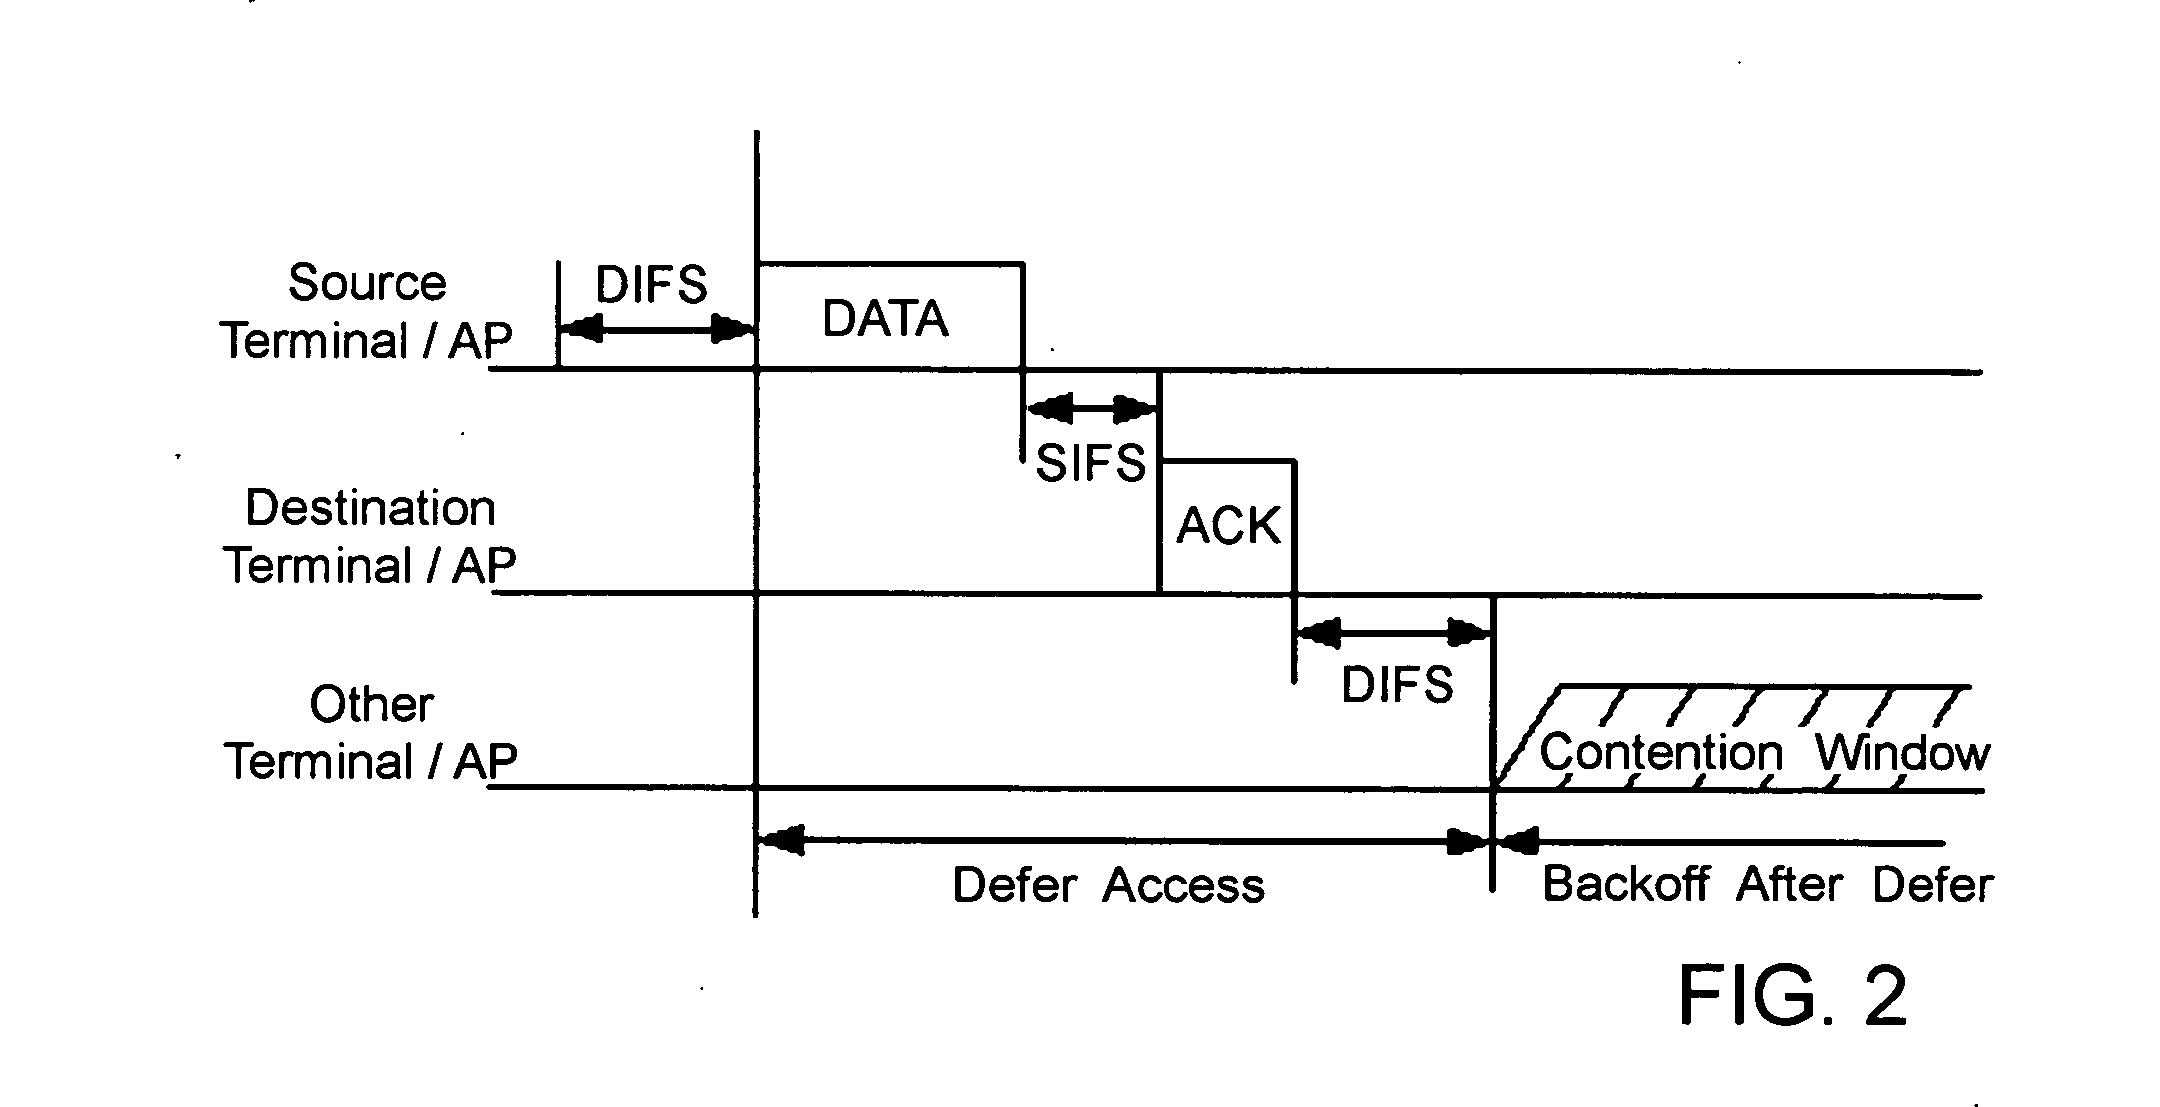 Method and apparatus for evaluating performance of wireless LAN system